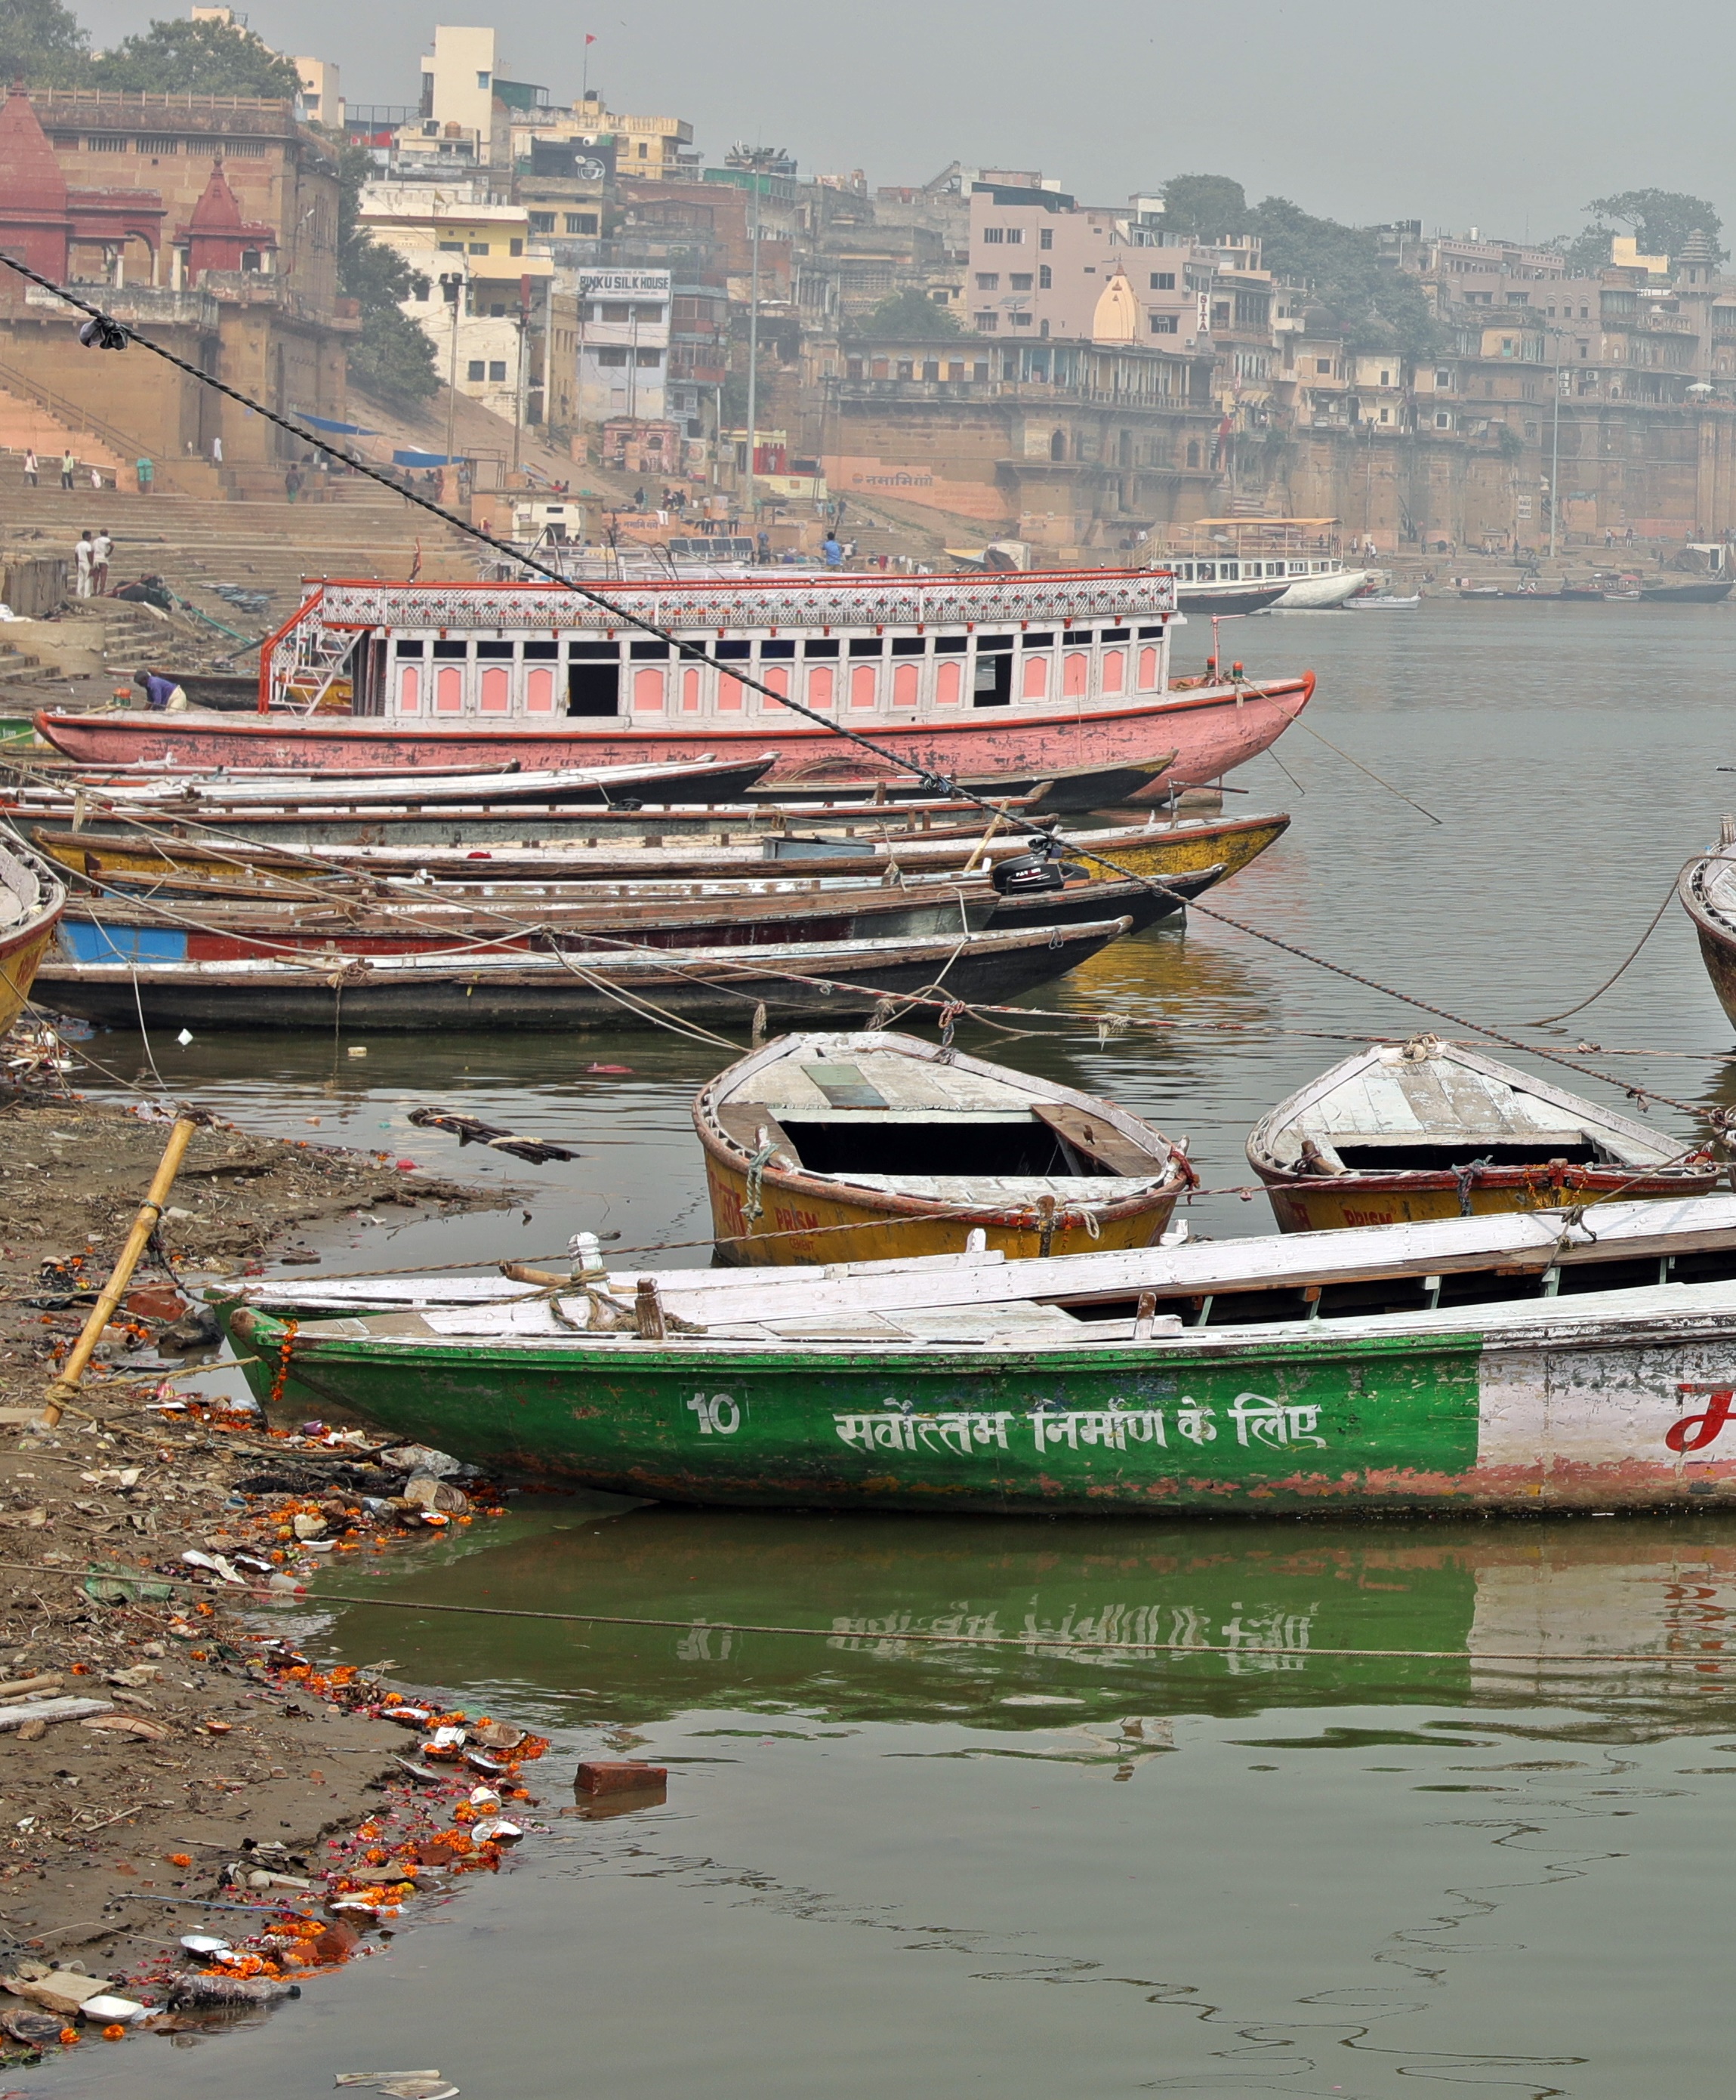 Pollution in the Ganges